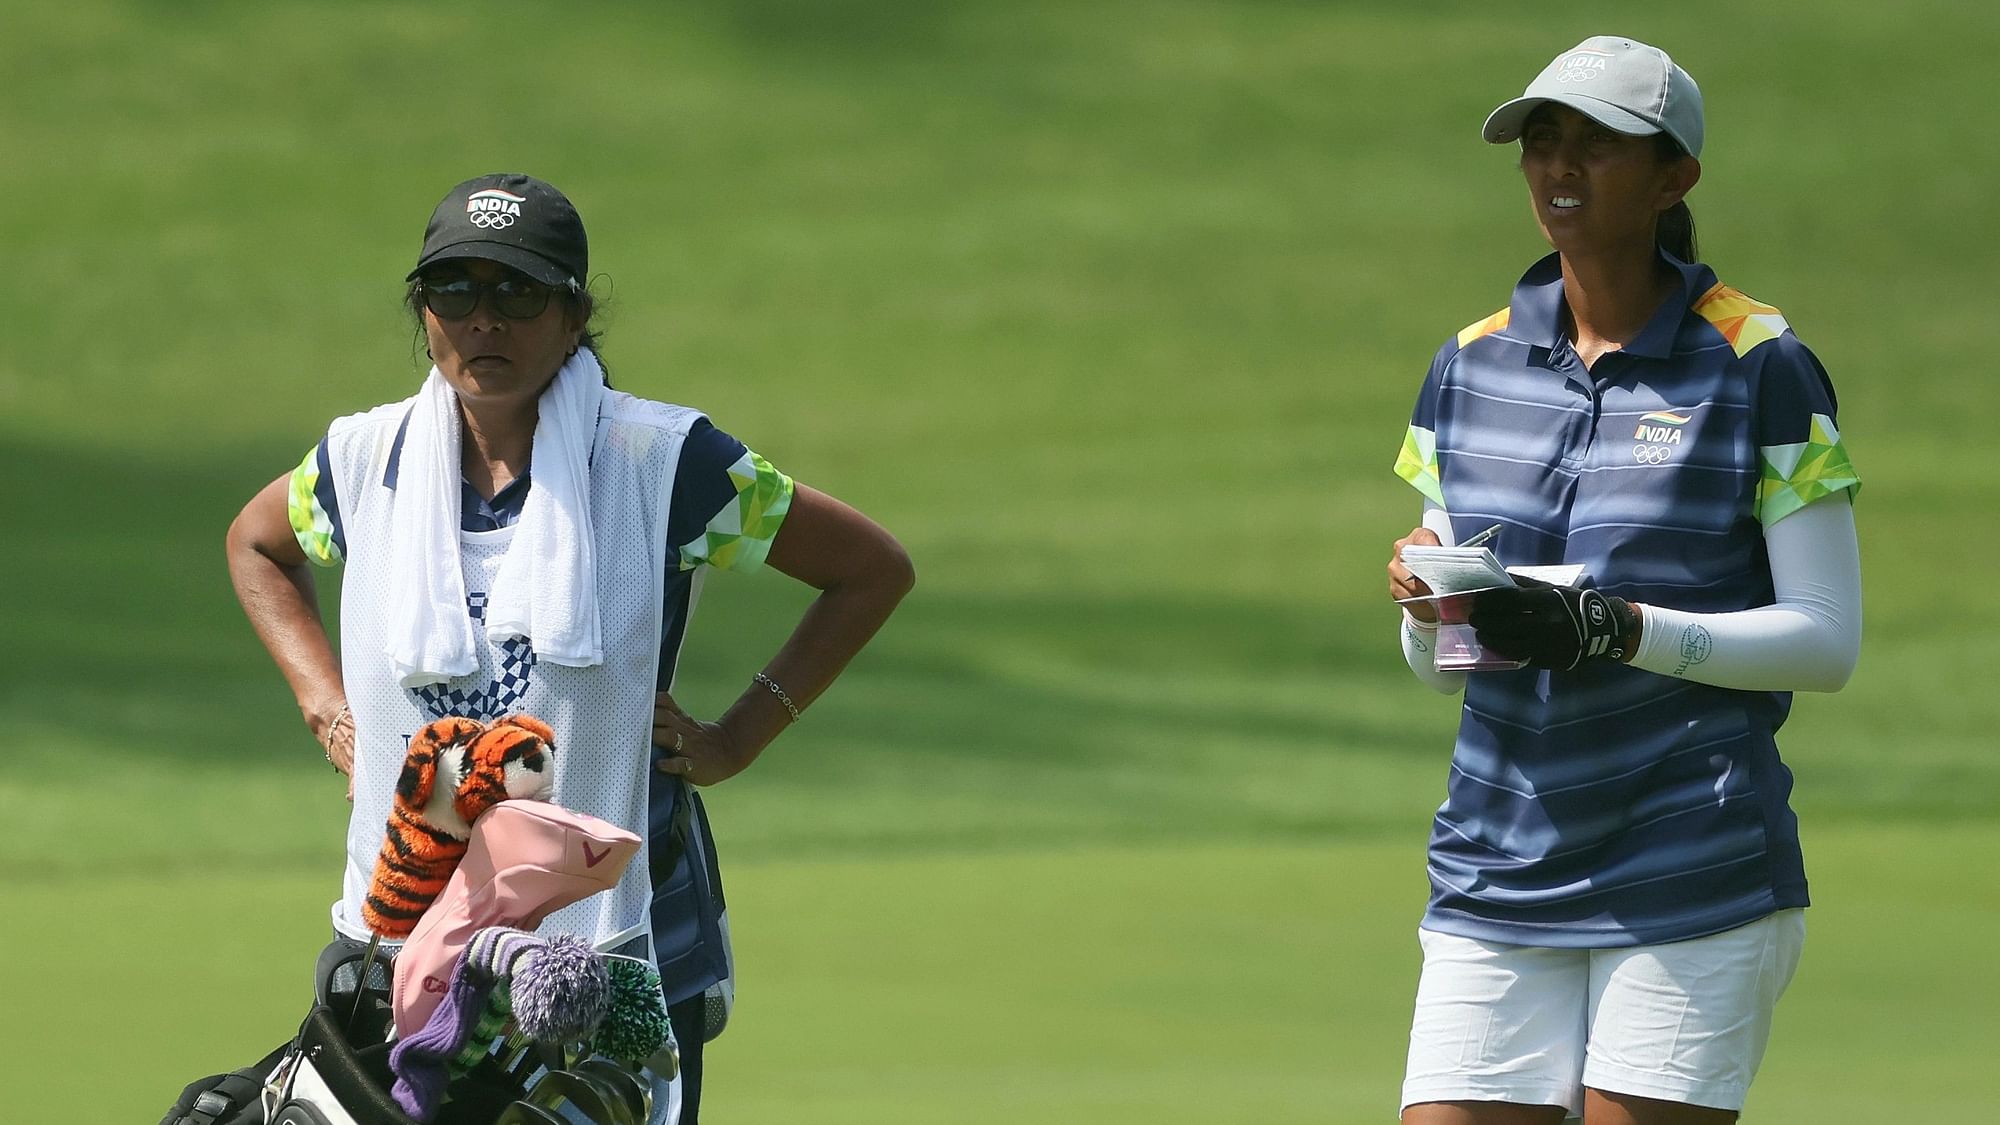 Aditi Ashok&#39;s mother is Her Caddy at the Tokyo 2020 Olympics